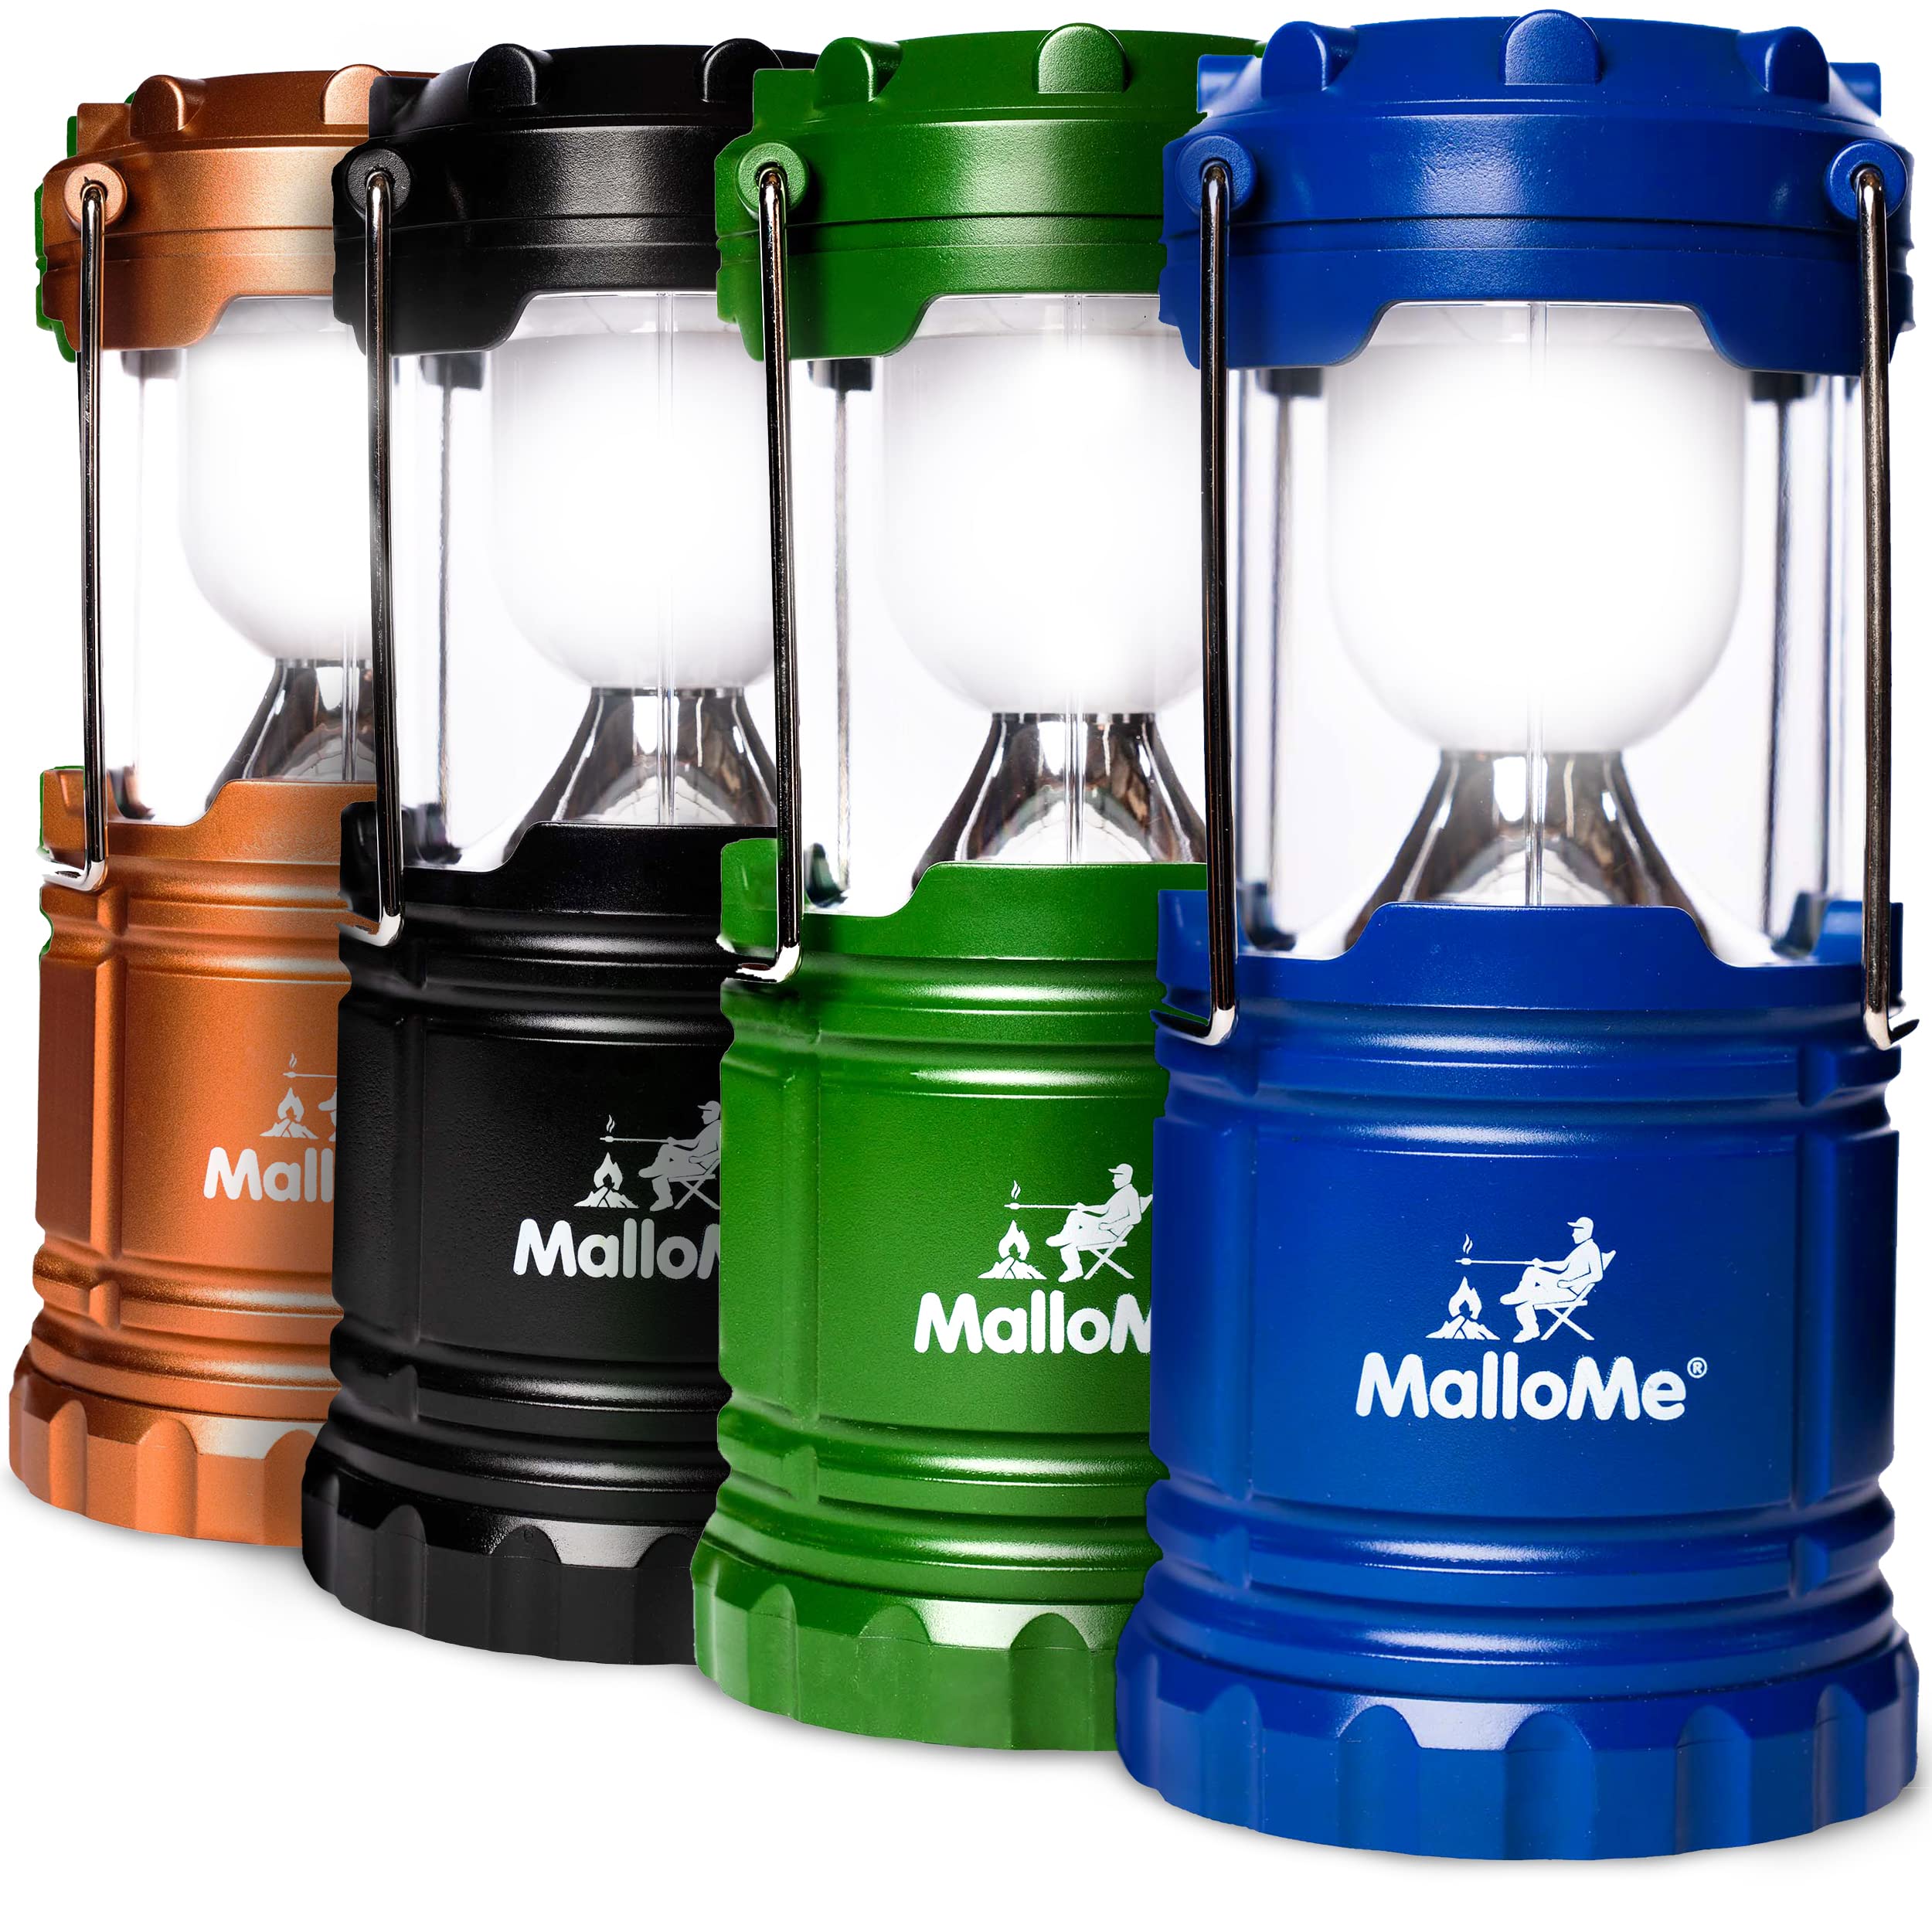 MalloMe Camping Lantern Multicolor 8 Pack Lanterns for Power